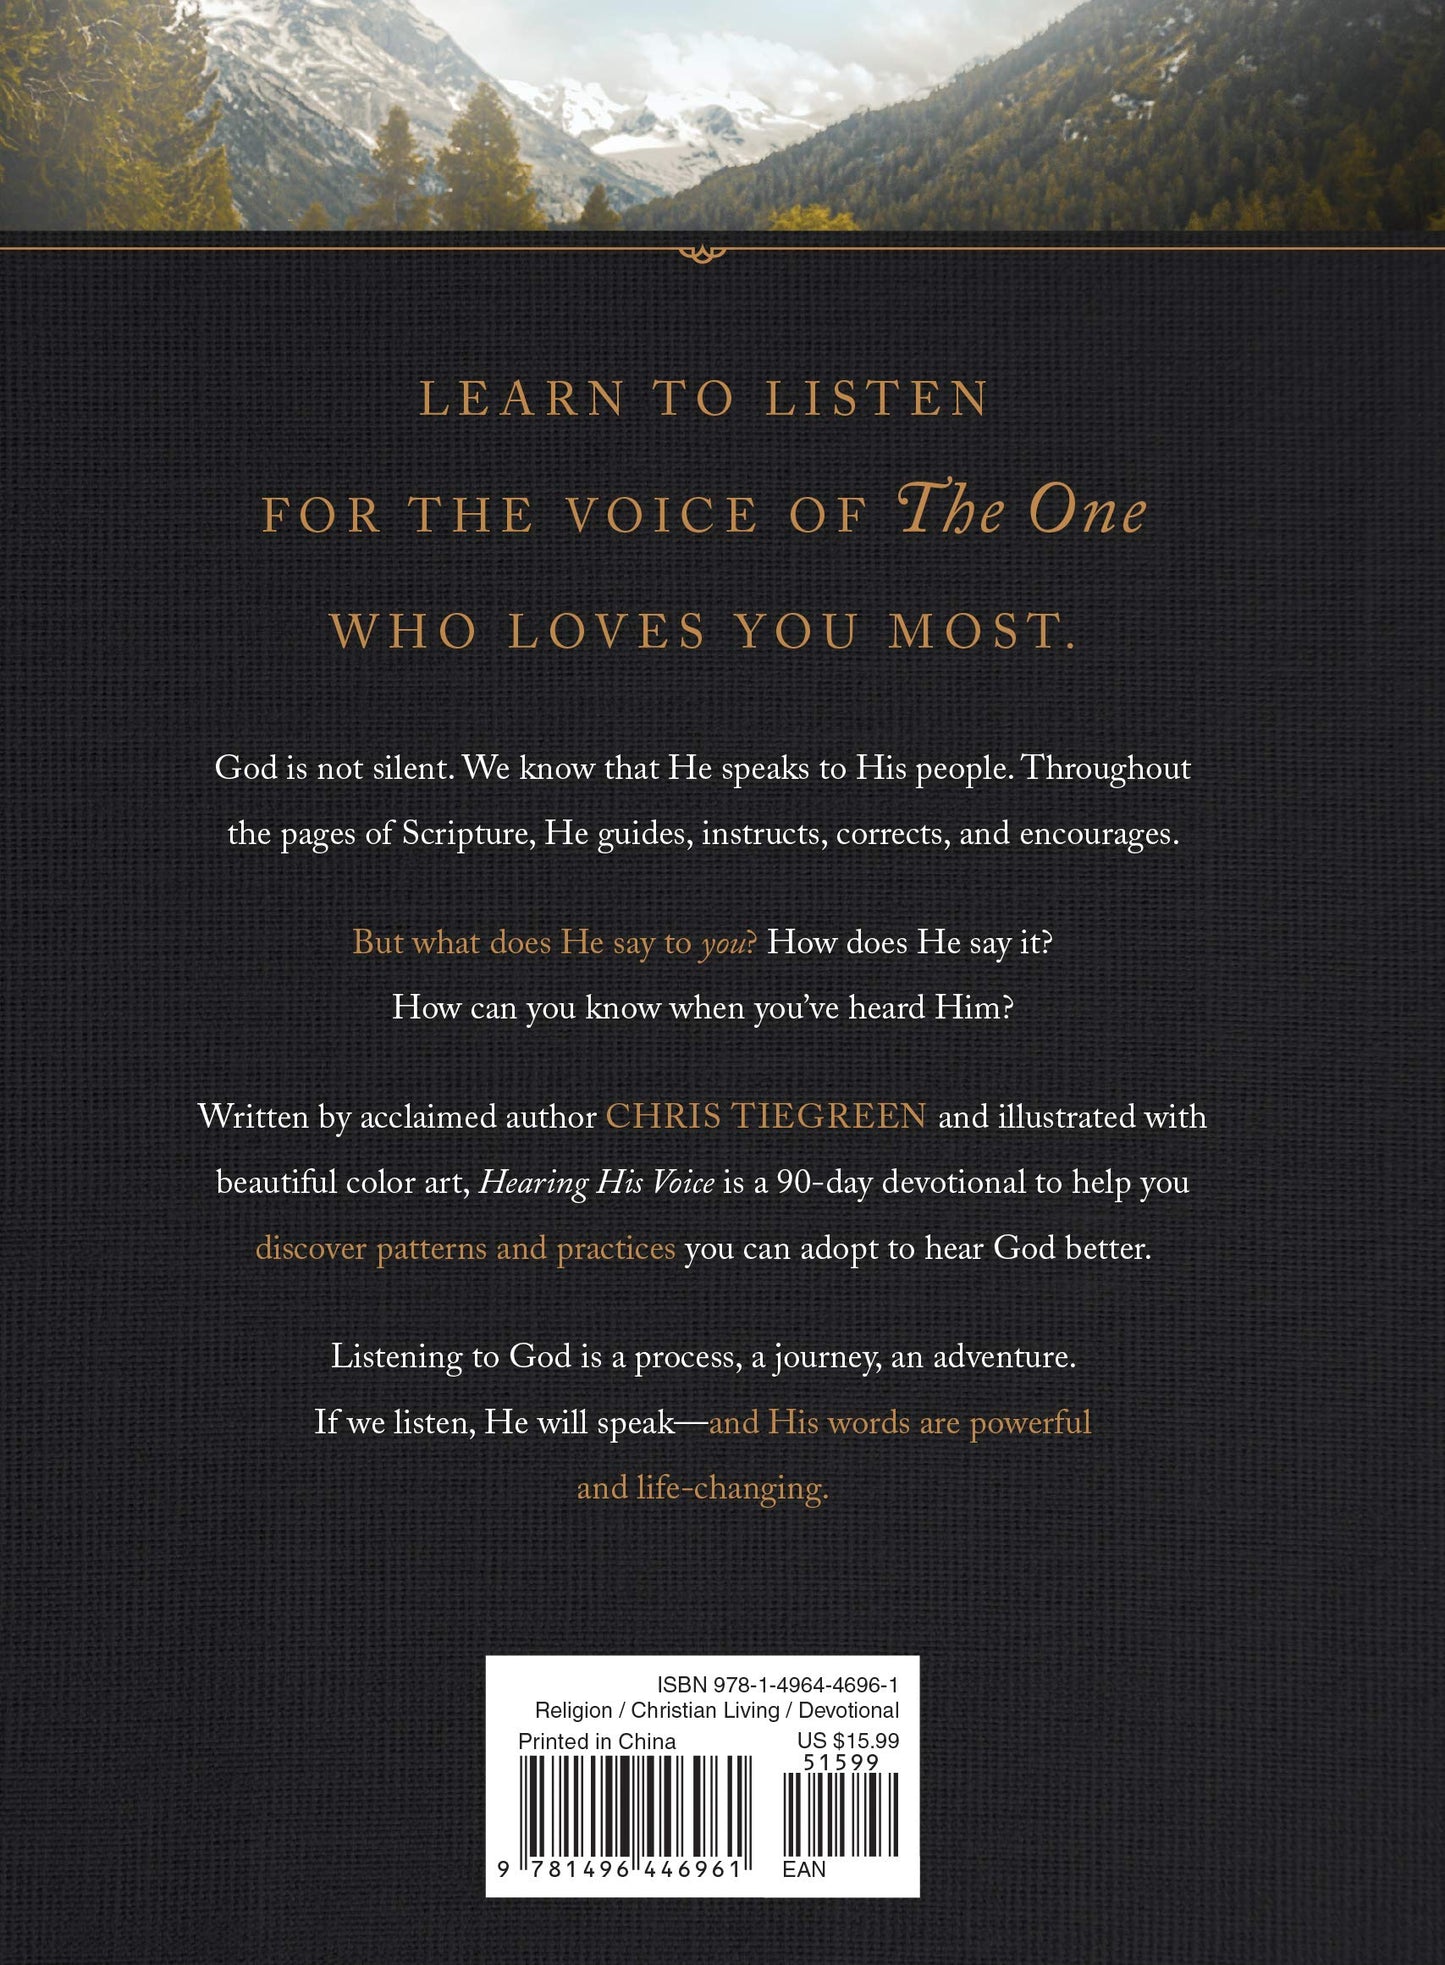 Hearing His Voice  - 90 Devotions